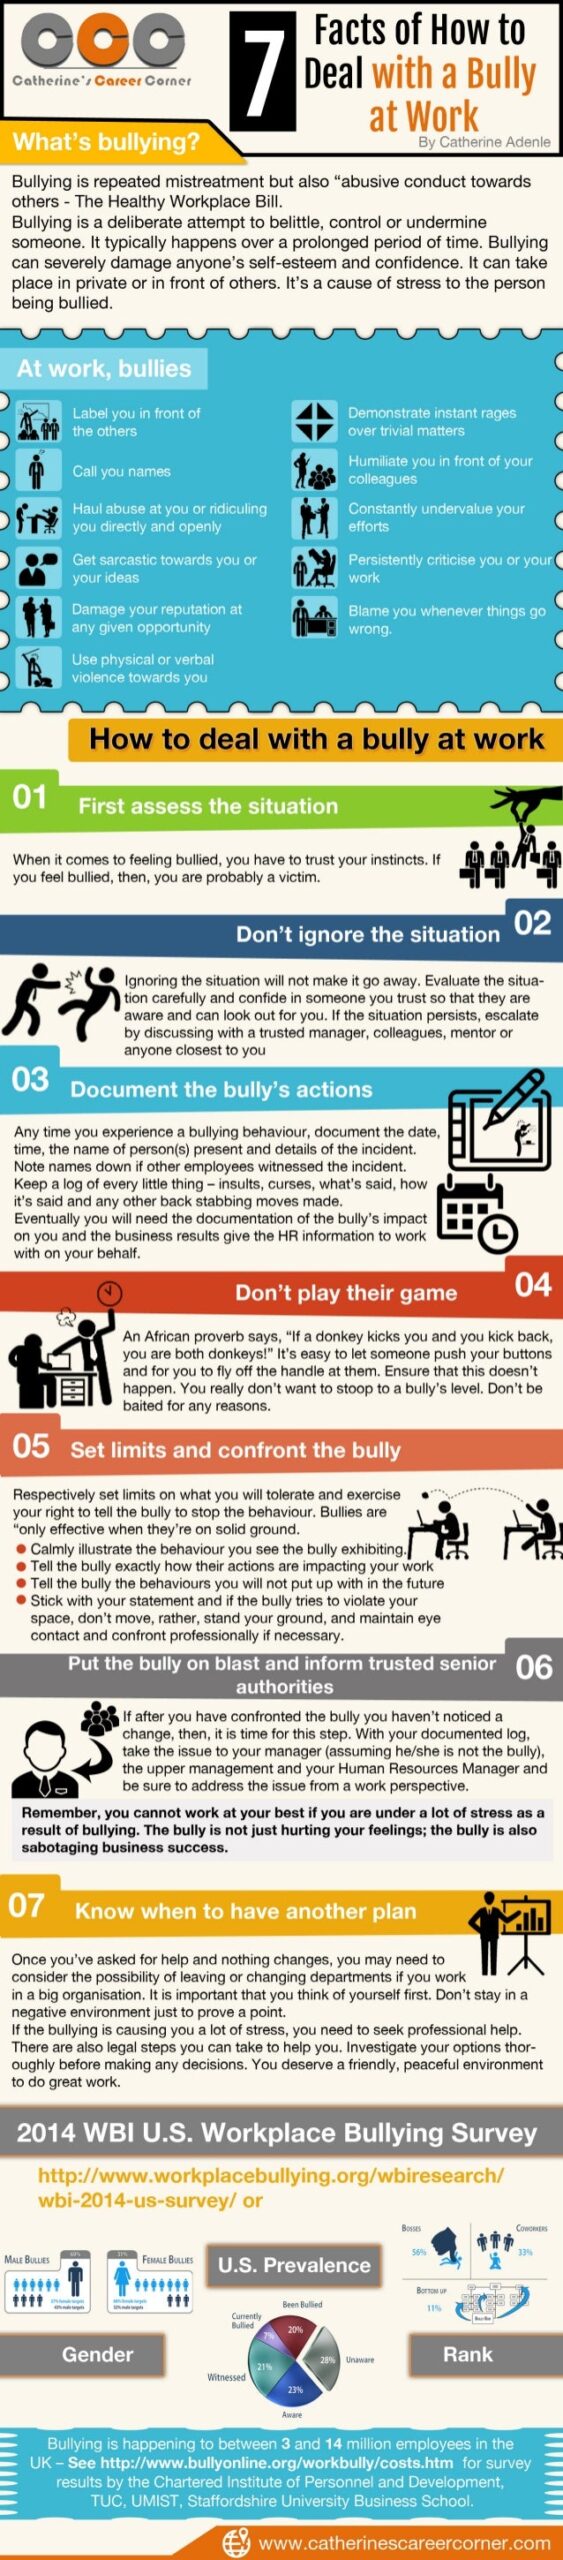 How to Make Your Office a Bullying-Free Zone | XNSPY Official Blog